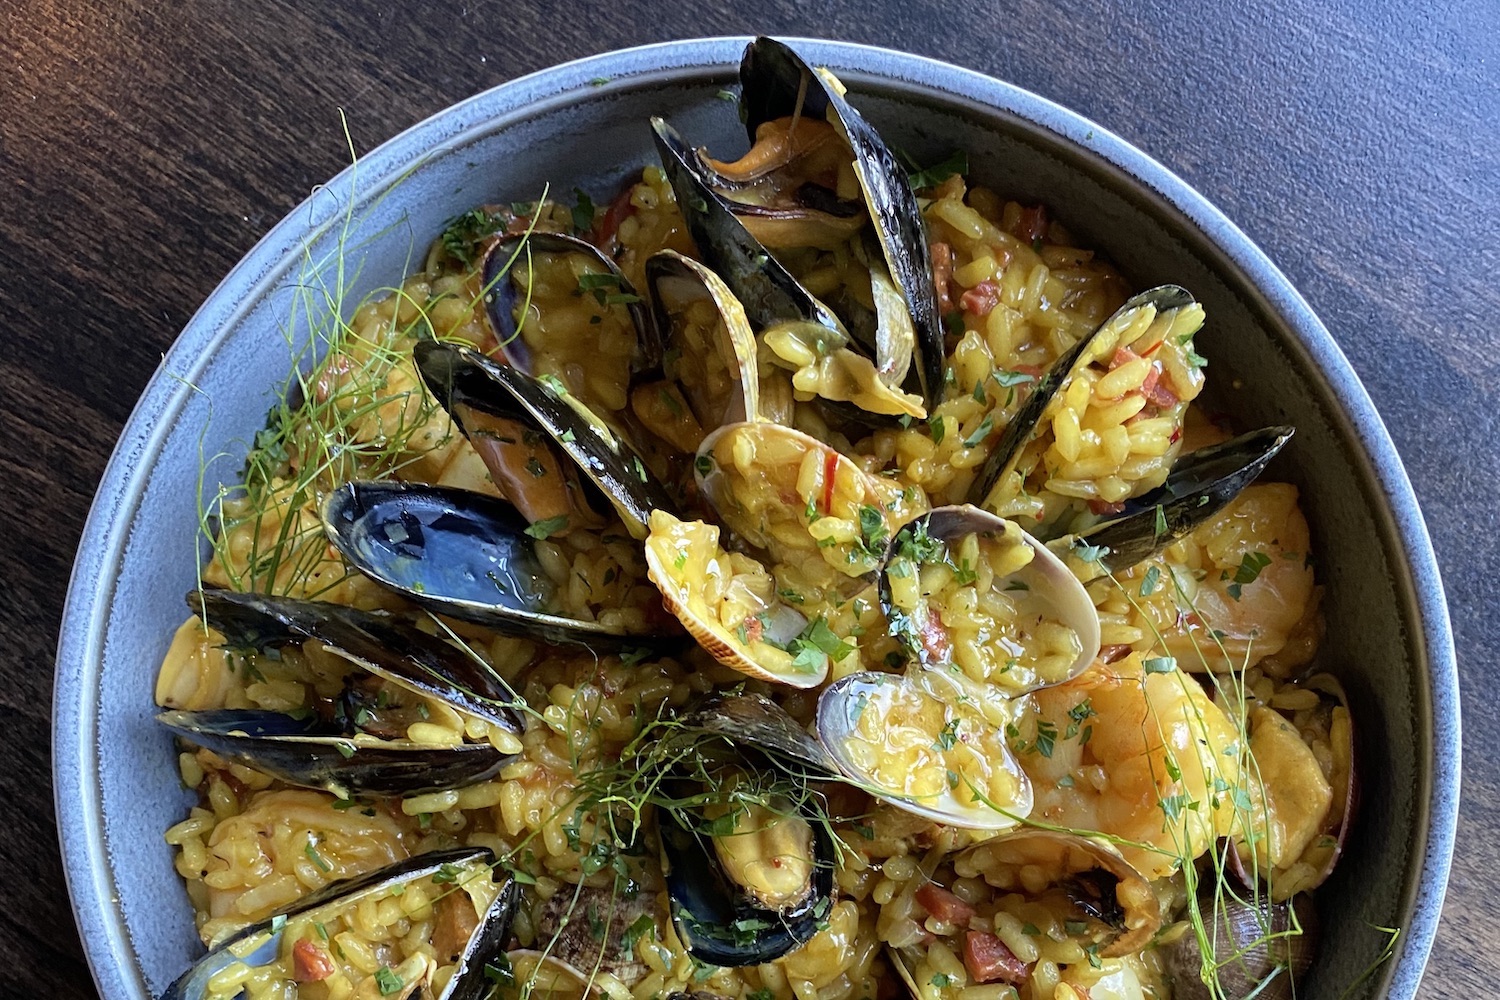 Rice and mussels dish at Seville